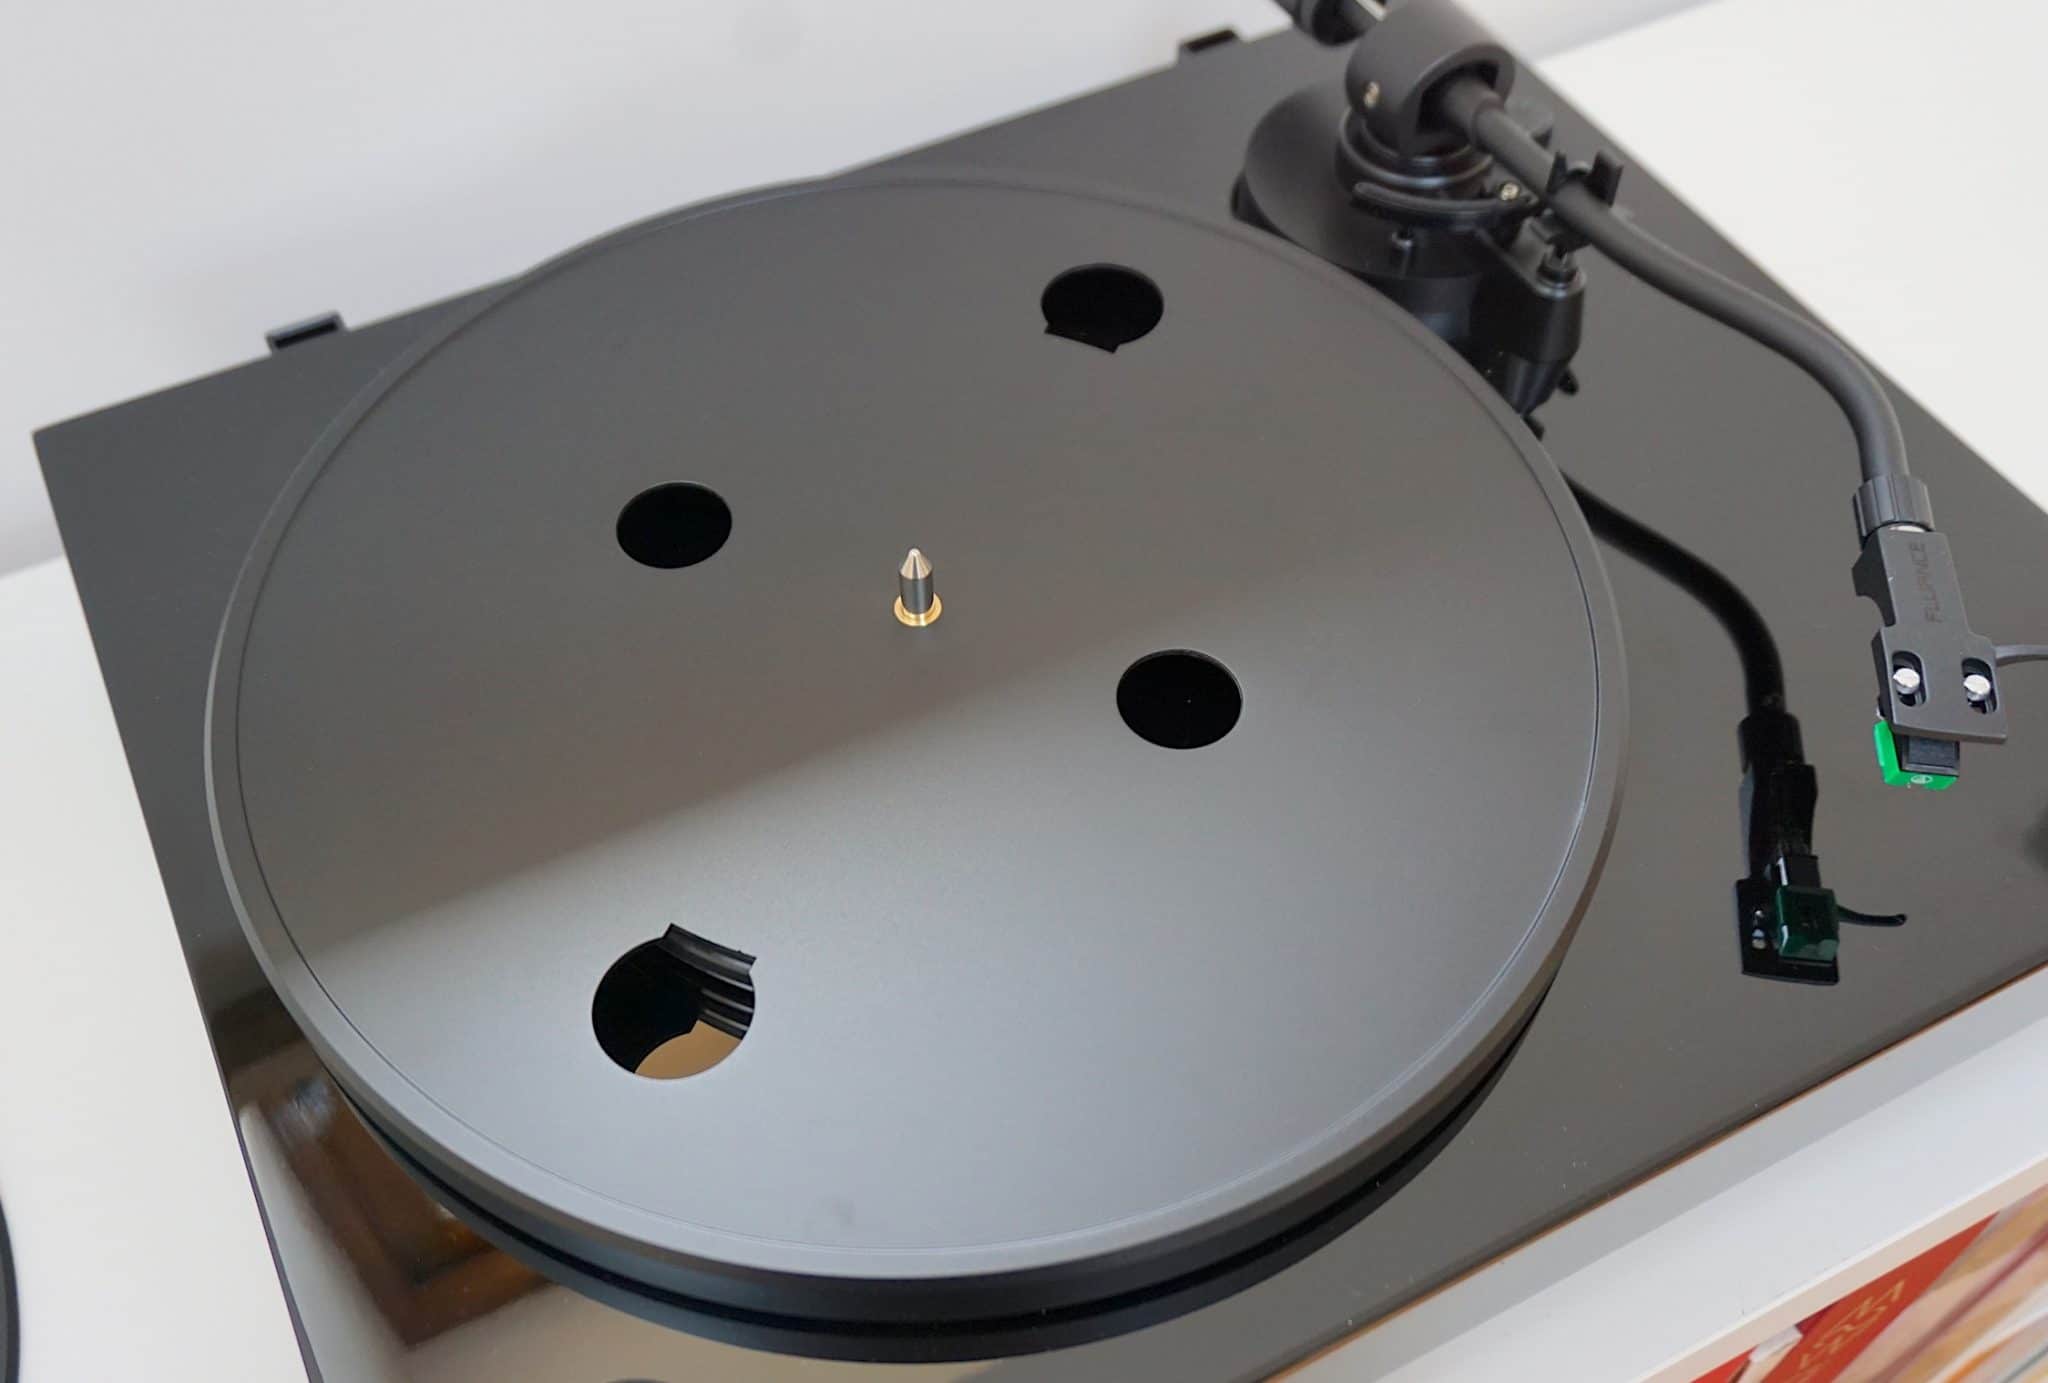 RT81 Turntable From Fluance